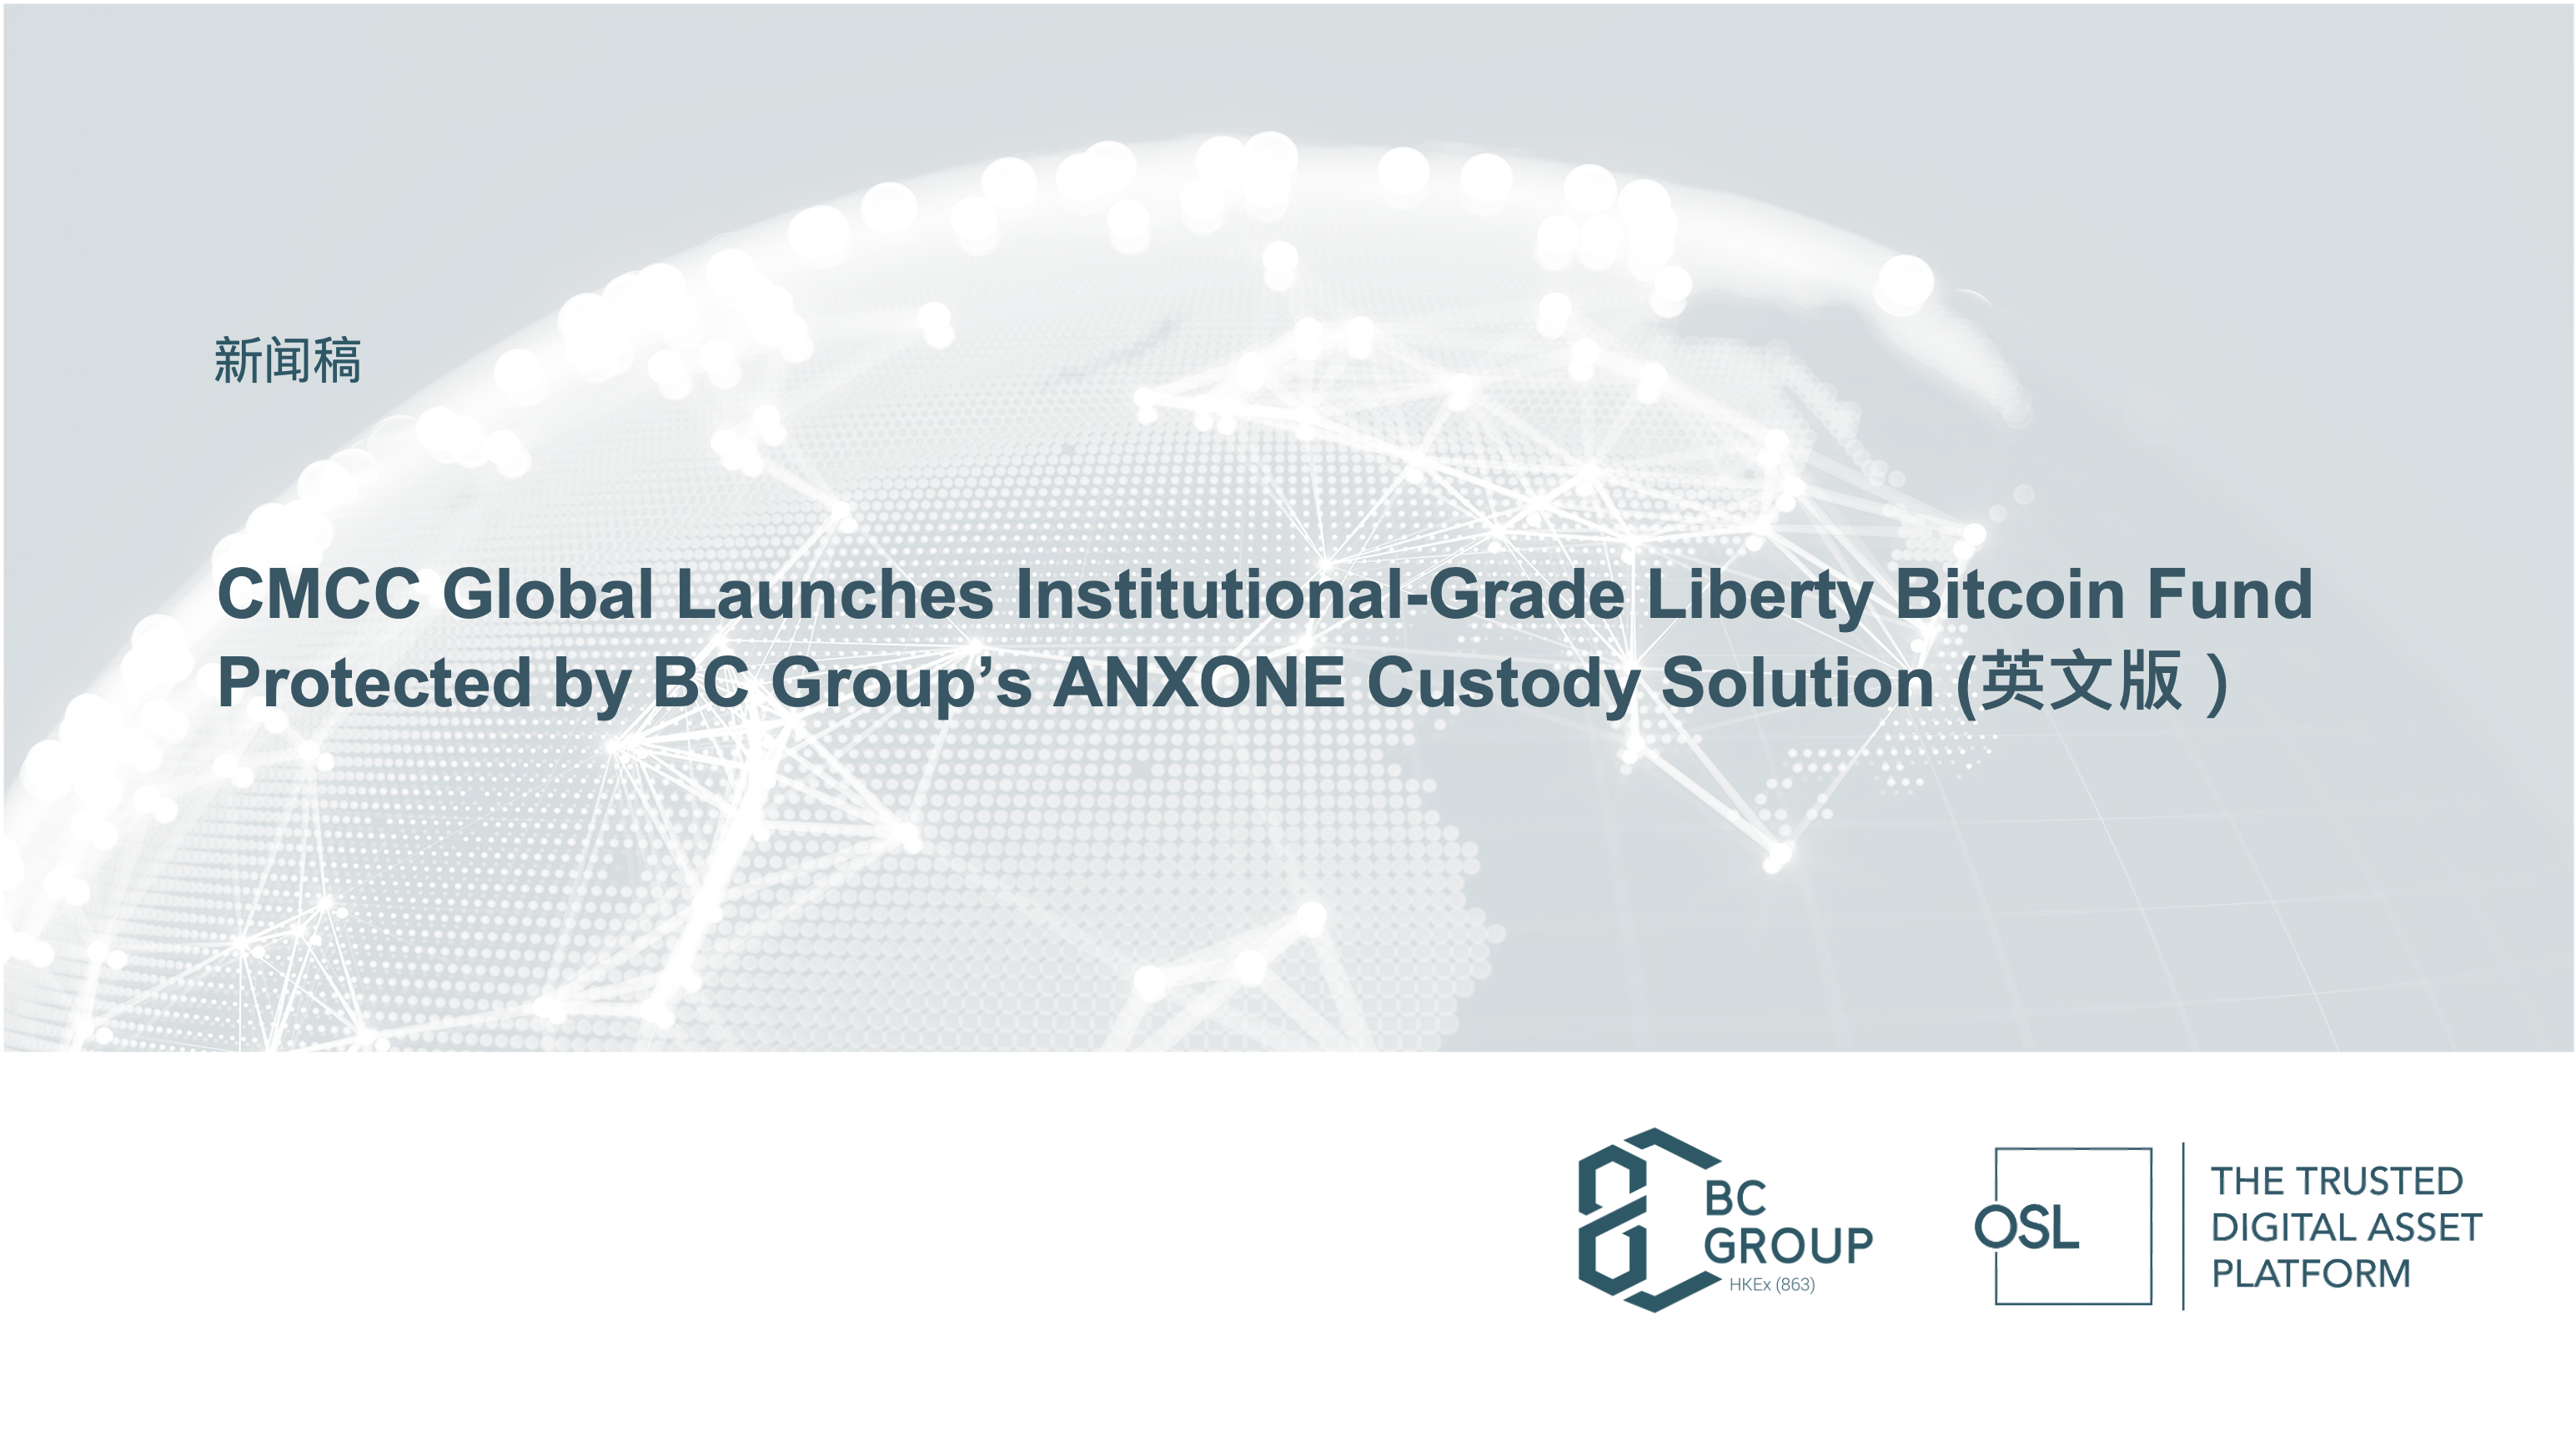 CMCC Global Launches Institutional-Grade Liberty Bitcoin Fund Protected by BC Group’s ANXONE Custody Solution